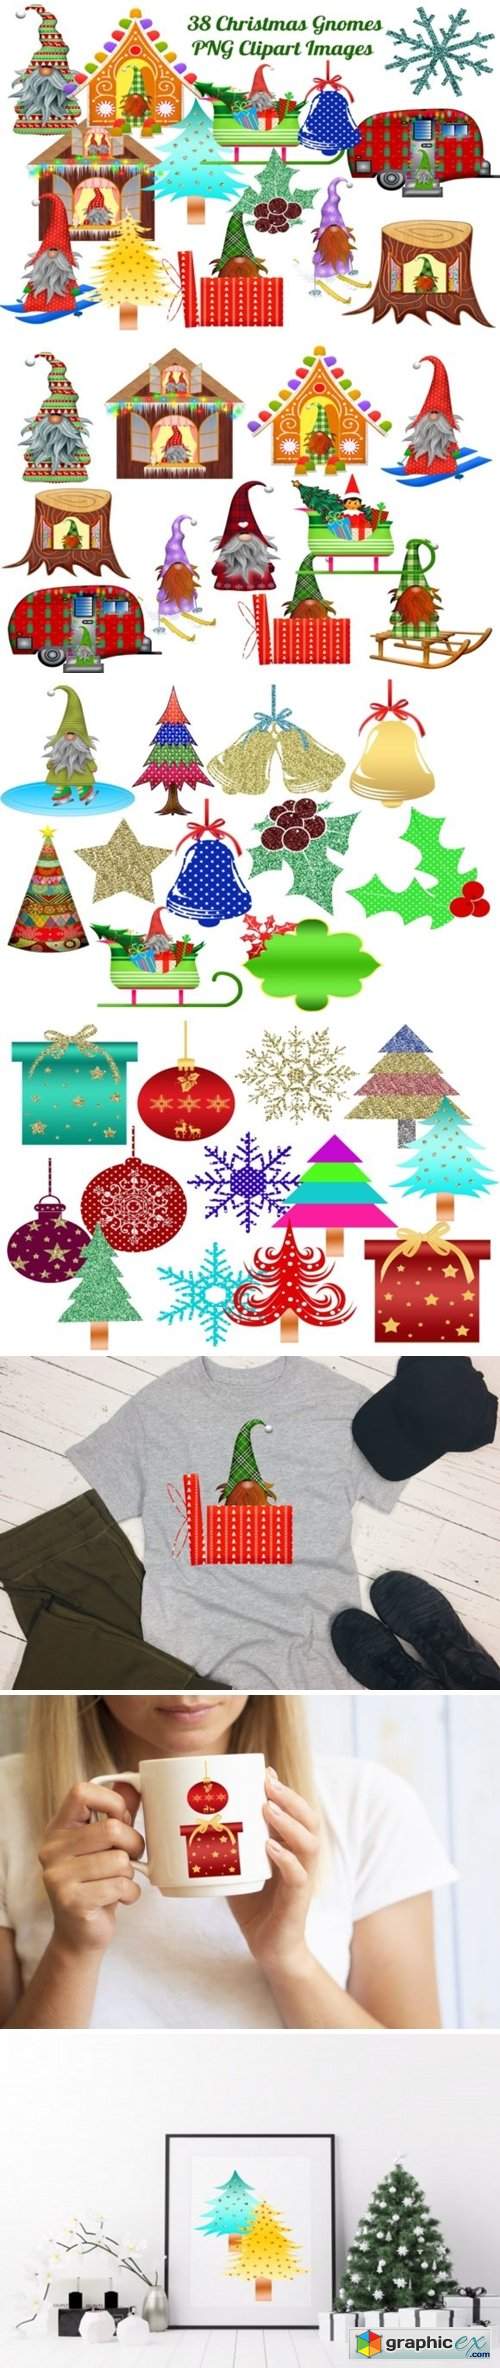 38 Christmas Gnomes Clip Art Images